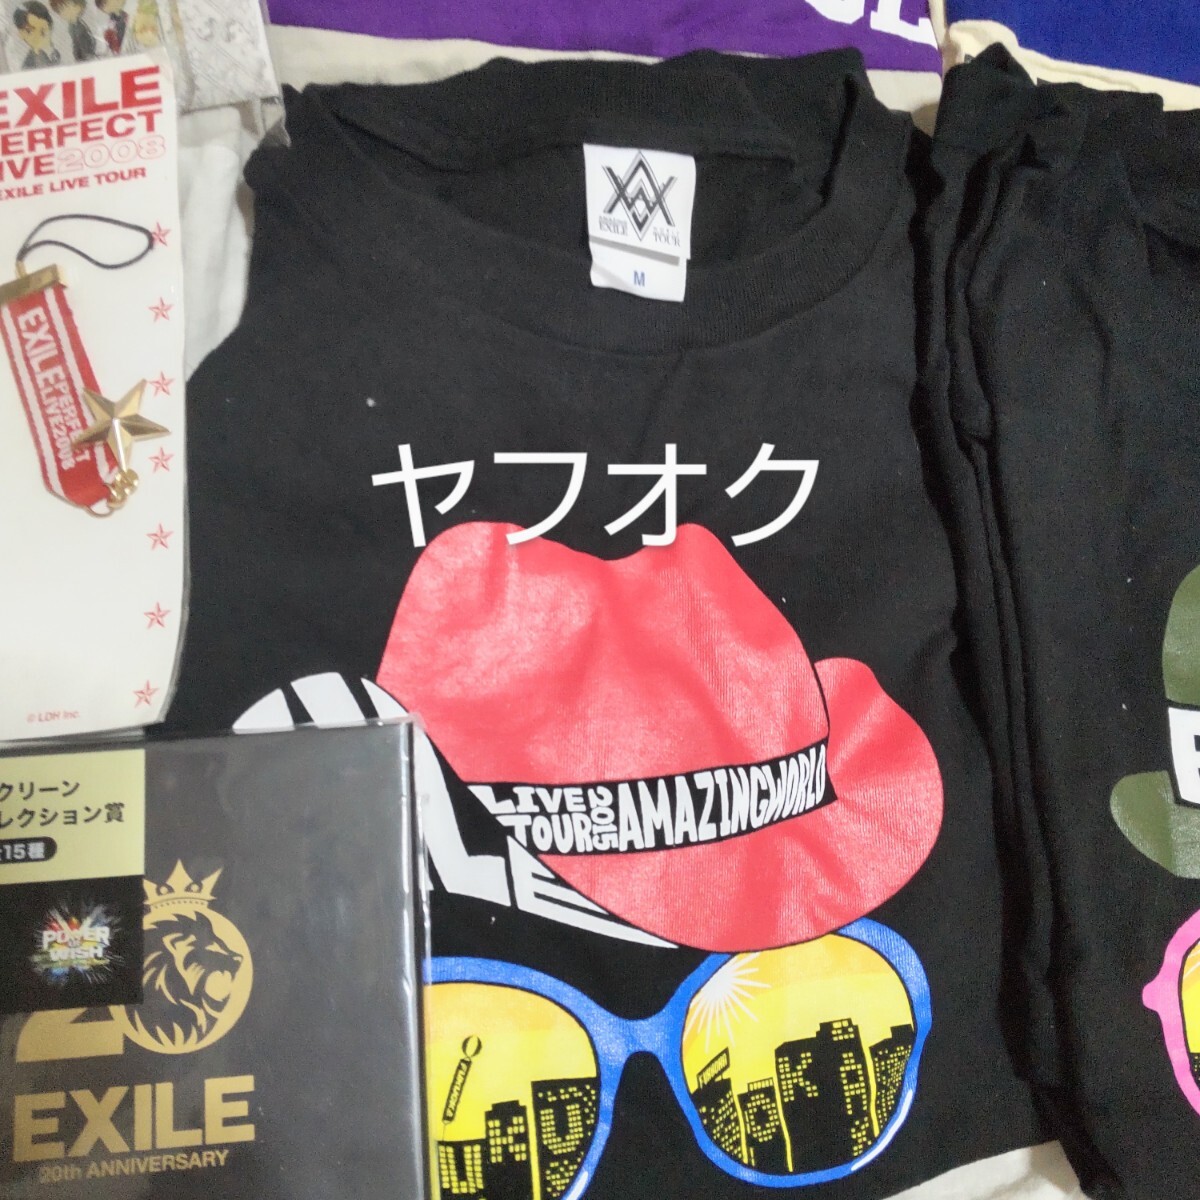 EXILE ネックストラップ、EXILE TRIBE PERFECT YEAR LIVE TOUR TOWER OF WISH2014、EXILE LIVE TOUR2015 AMAZING WORLD Tシャツ　等 セット_画像5